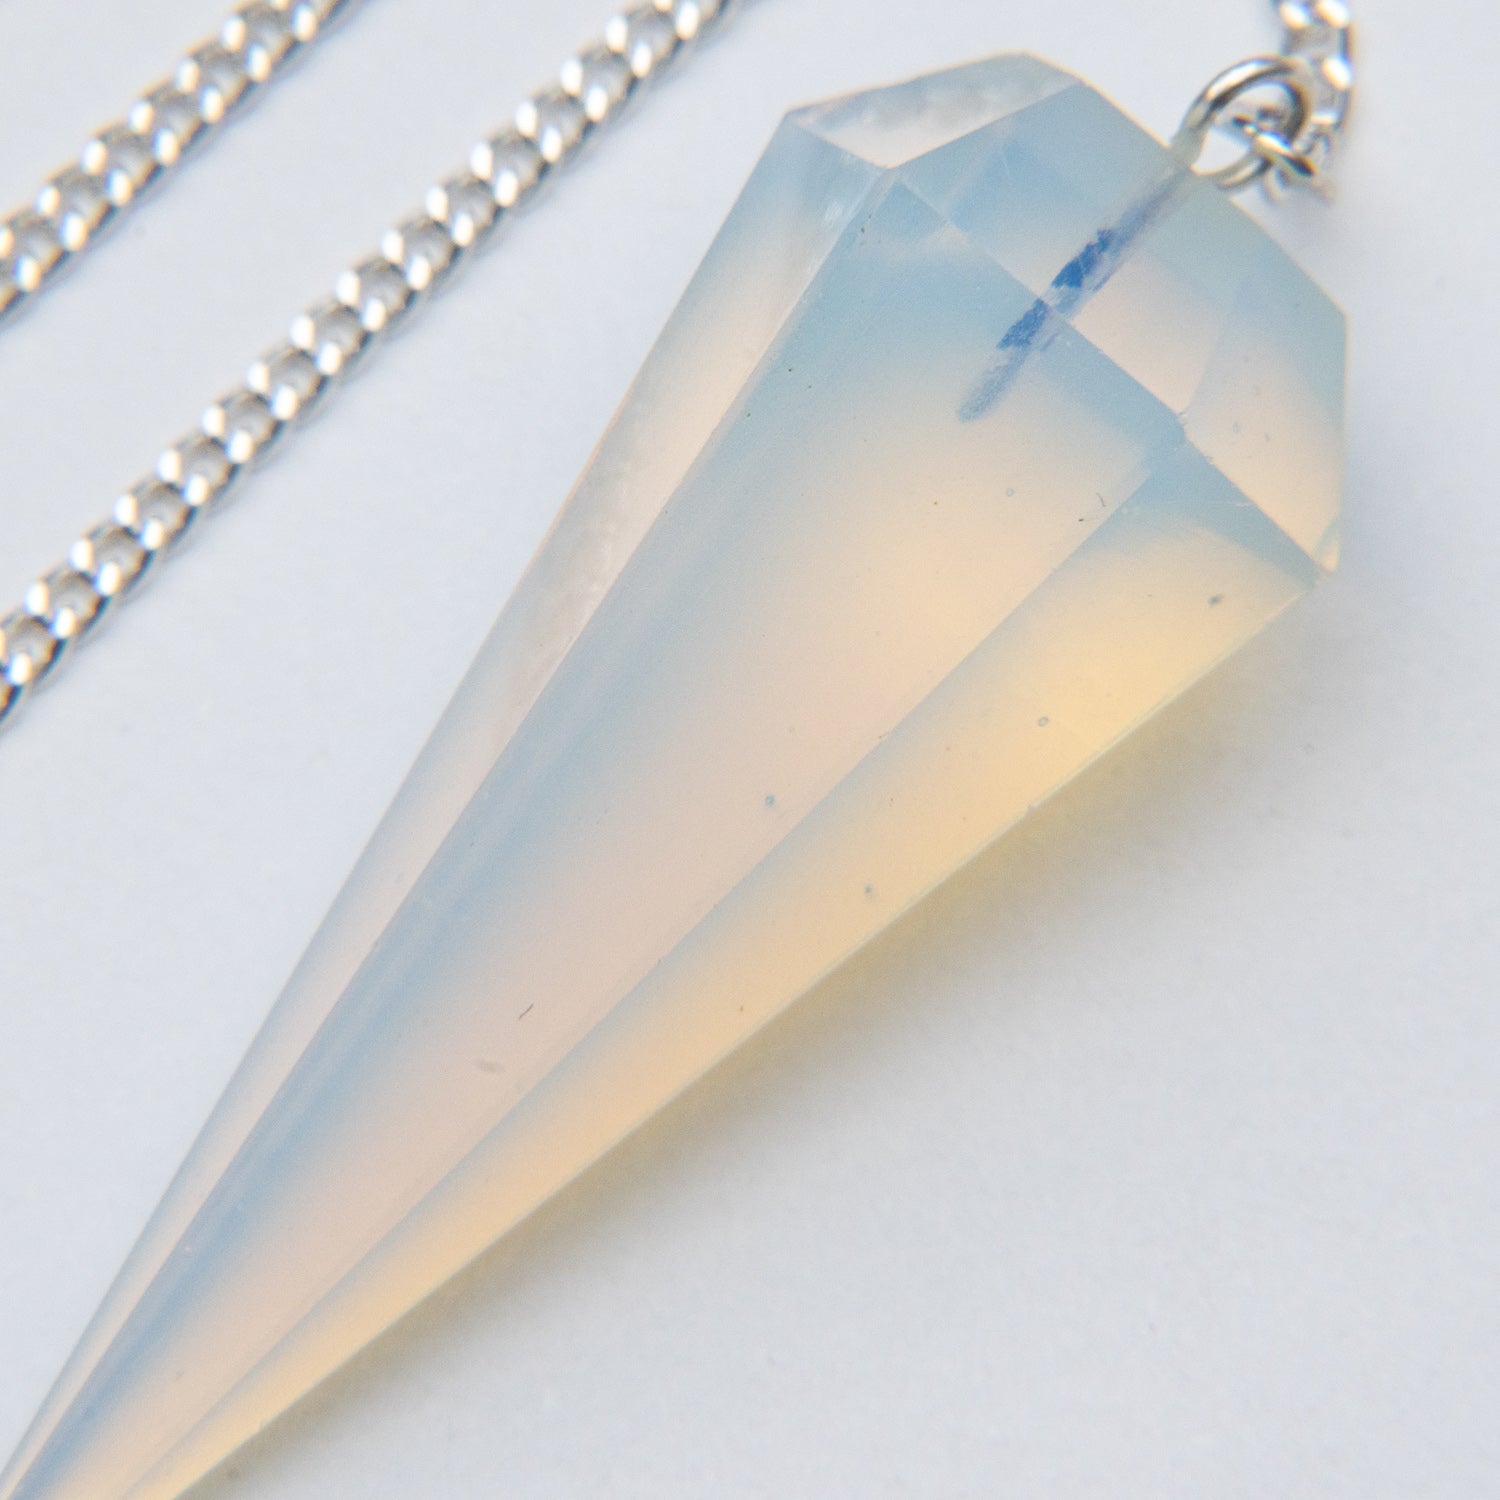 Genuine Polished Opalite Pendulum (with Chain) with black velvet pouch